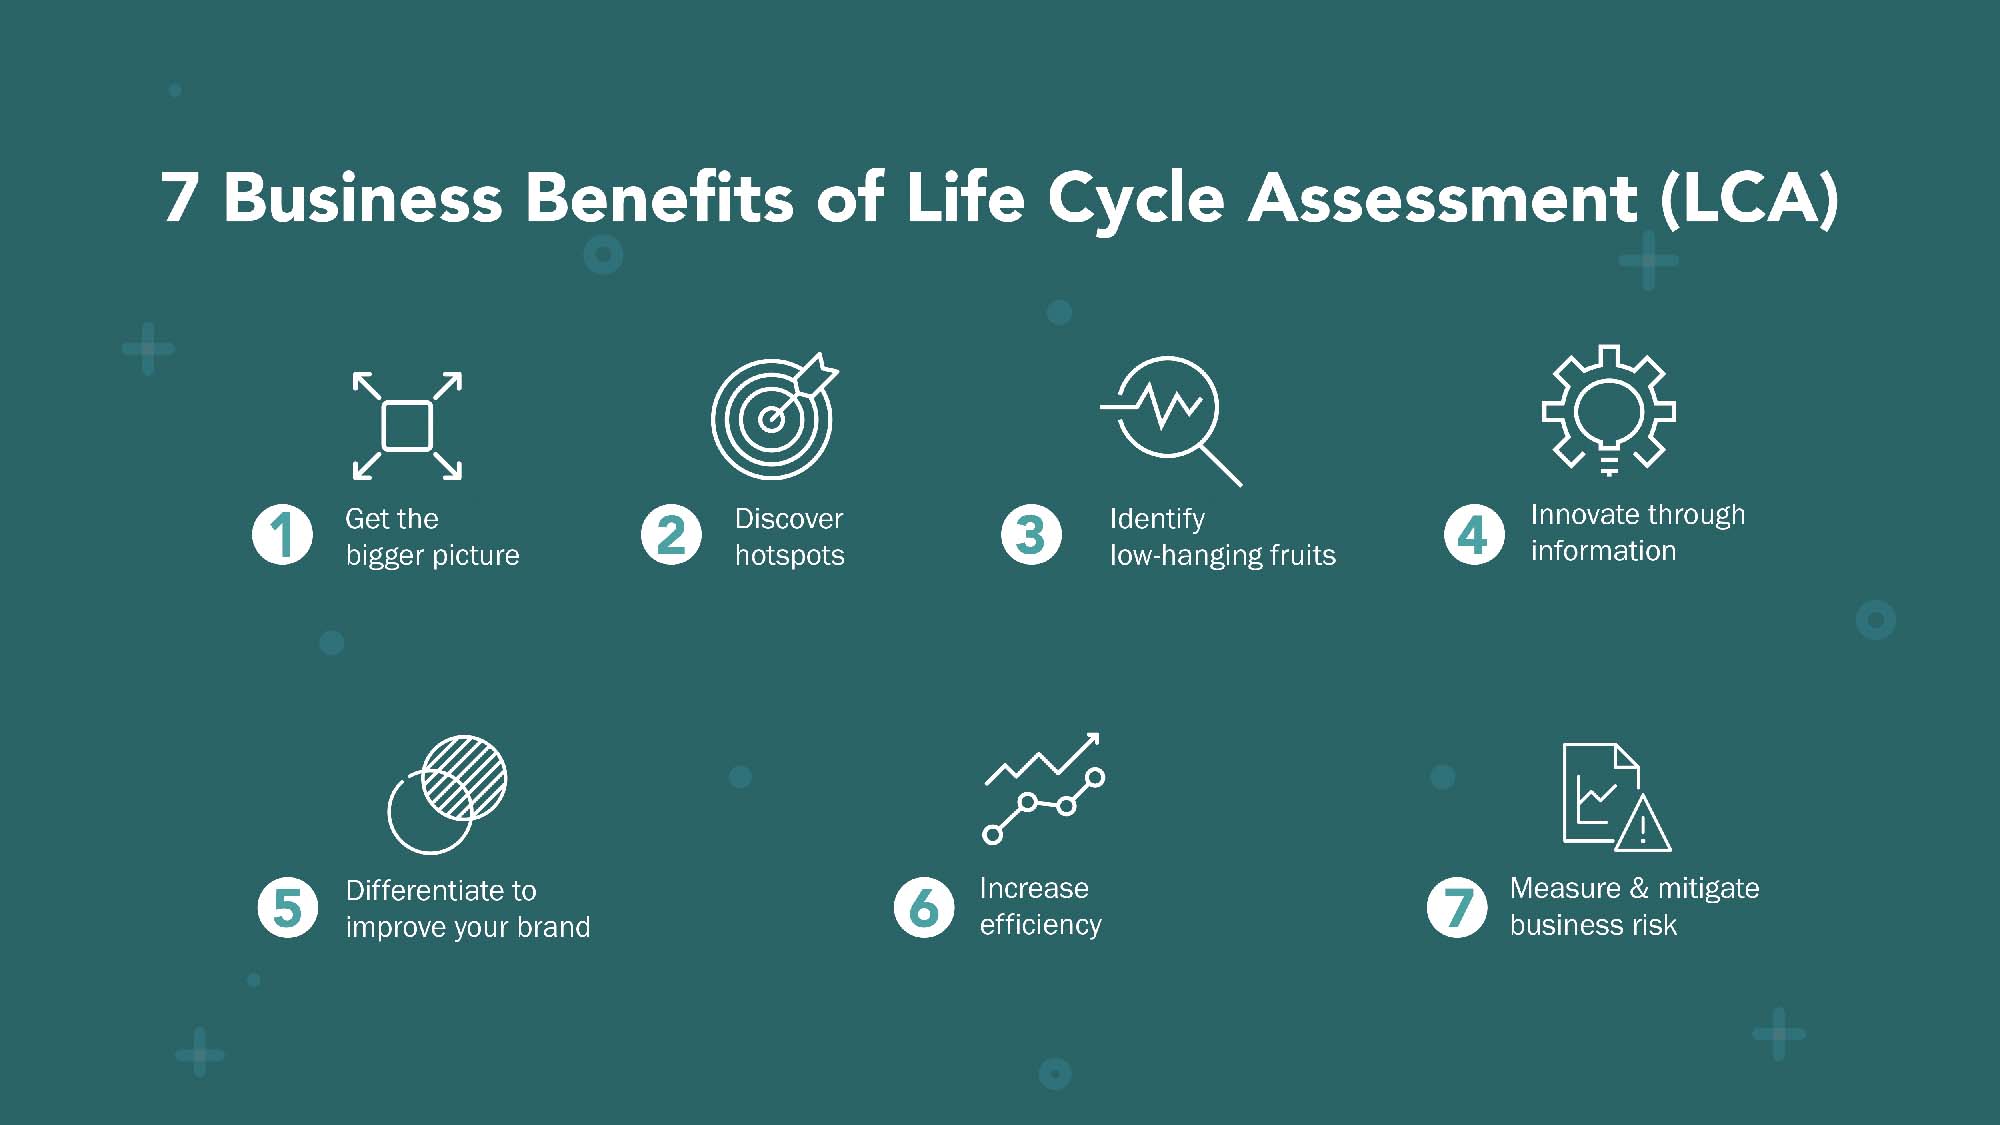 7 Business Benefits of Life Cycle Assessment (LCA)